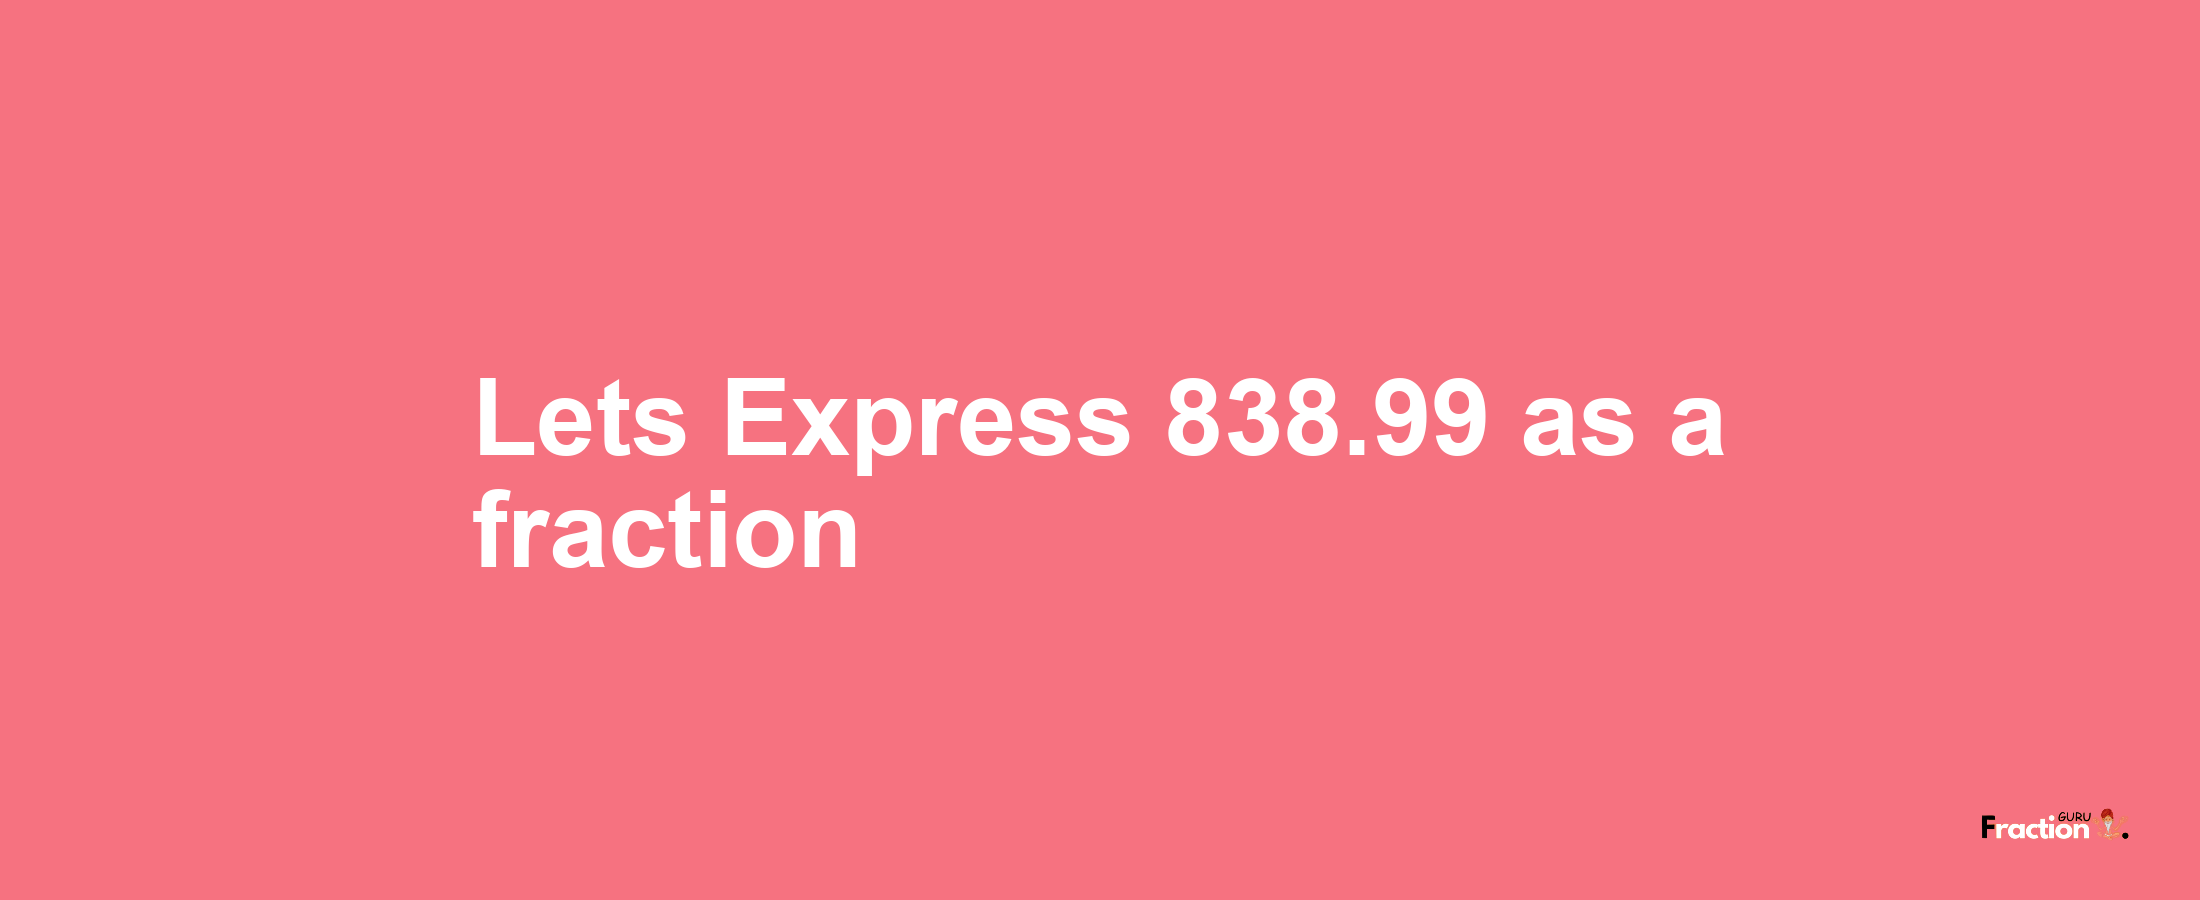 Lets Express 838.99 as afraction